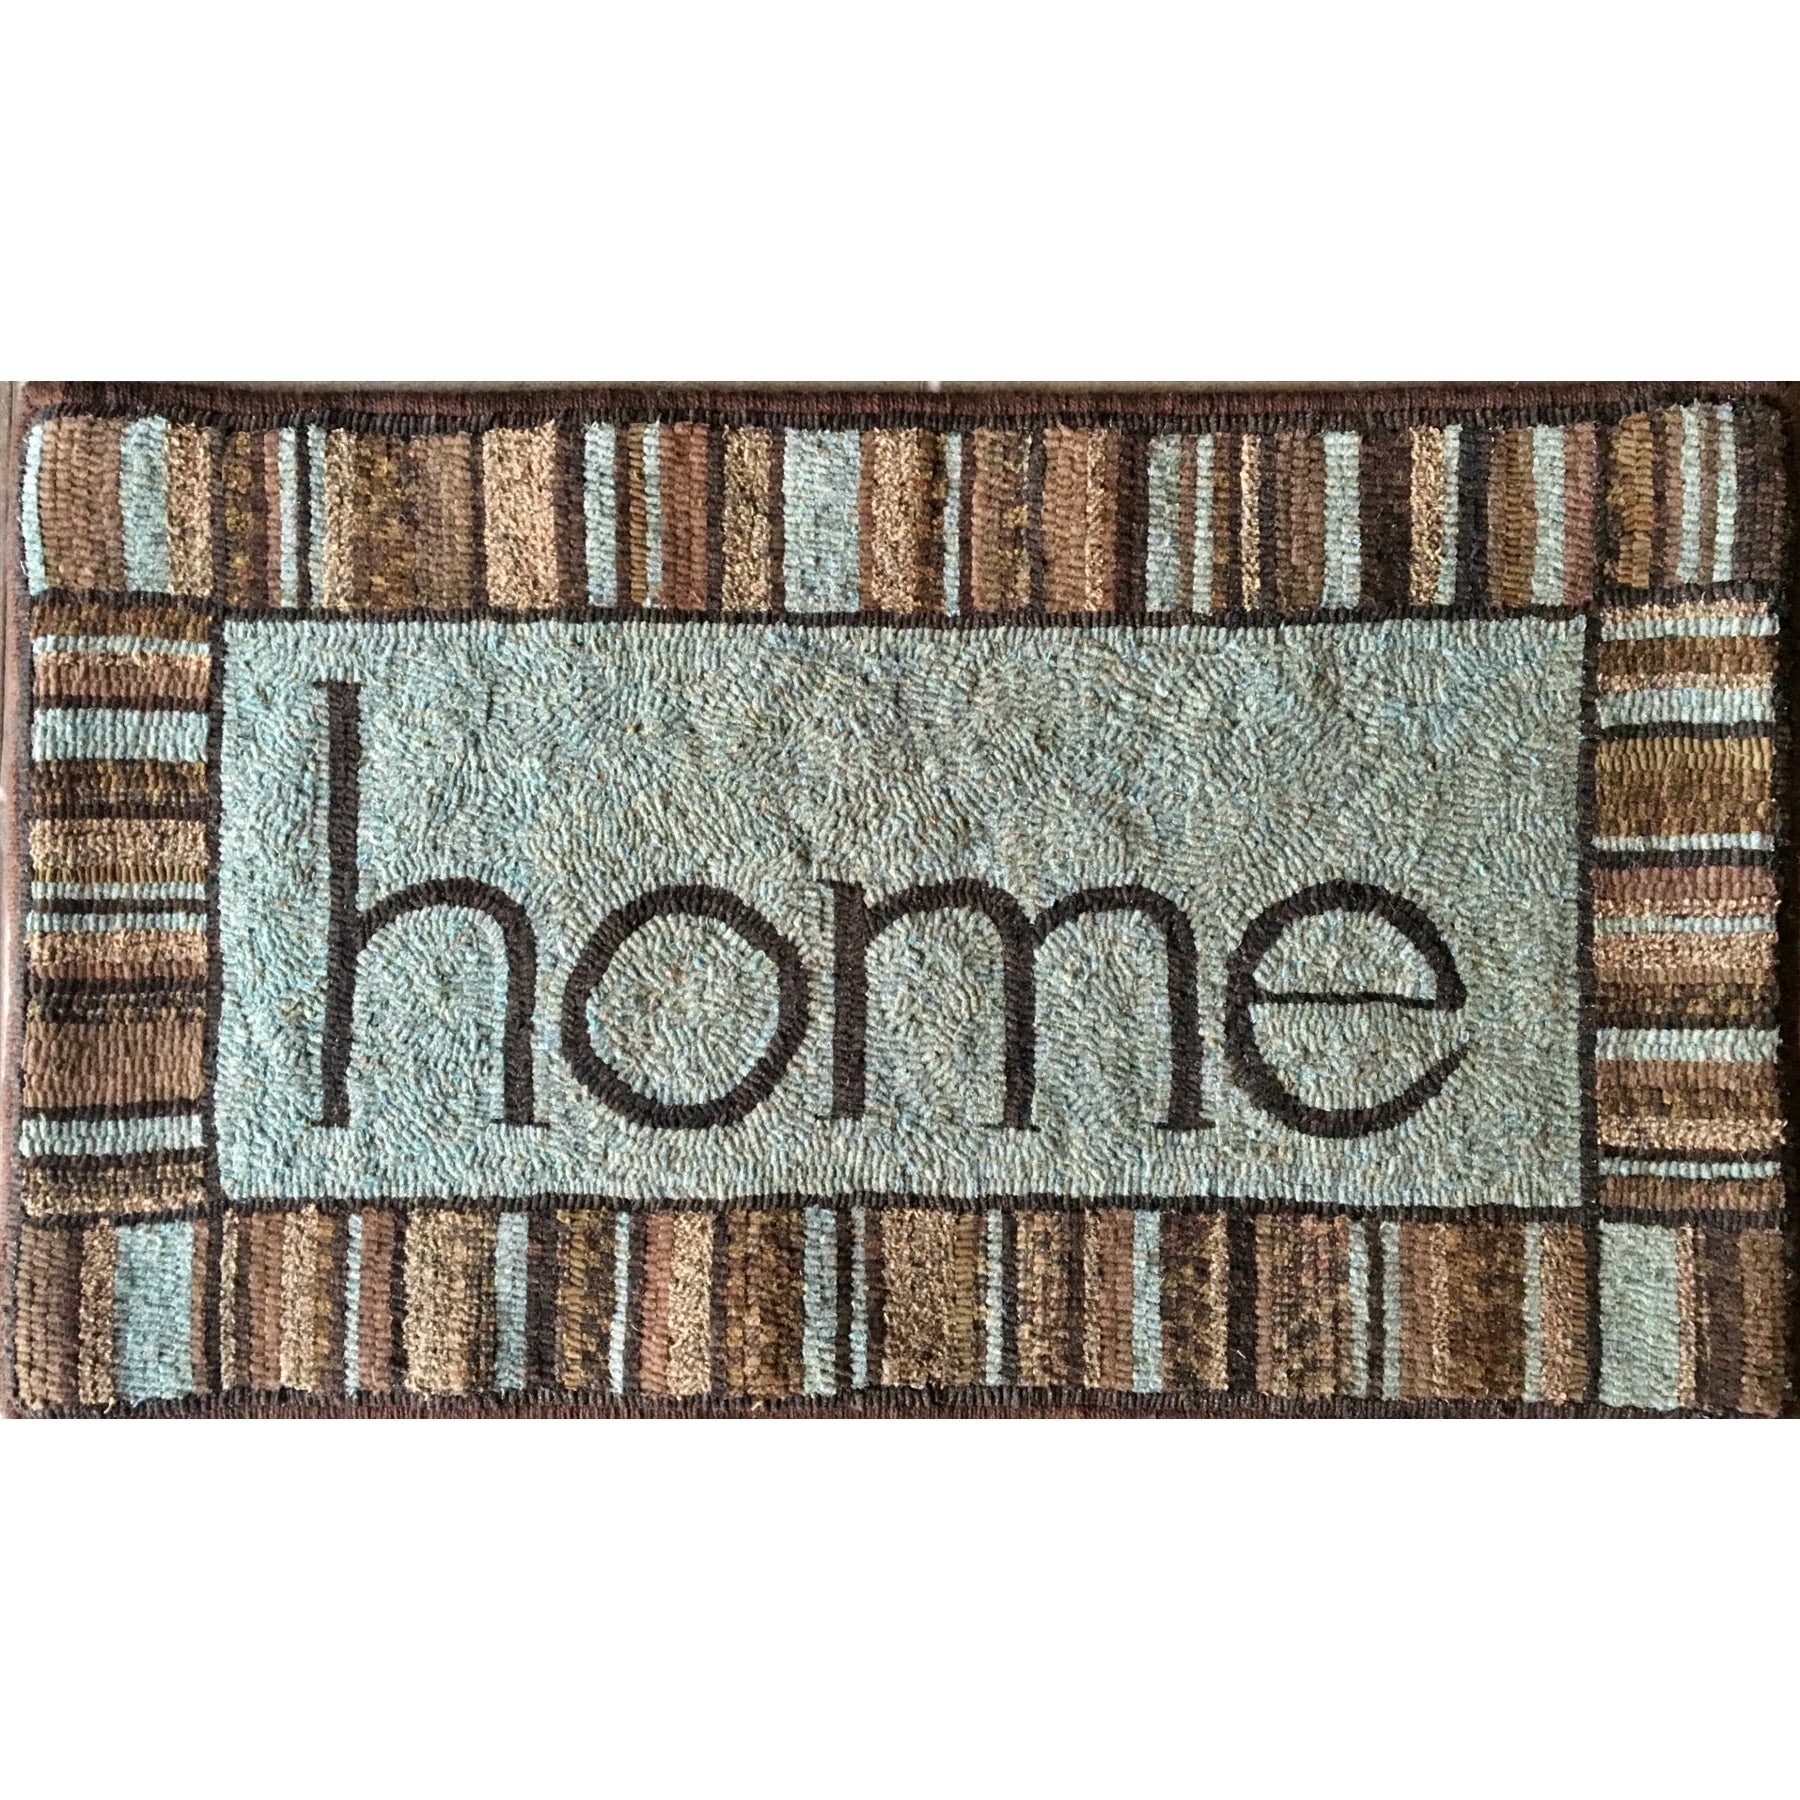 Home, rug hooked by Linda Powell